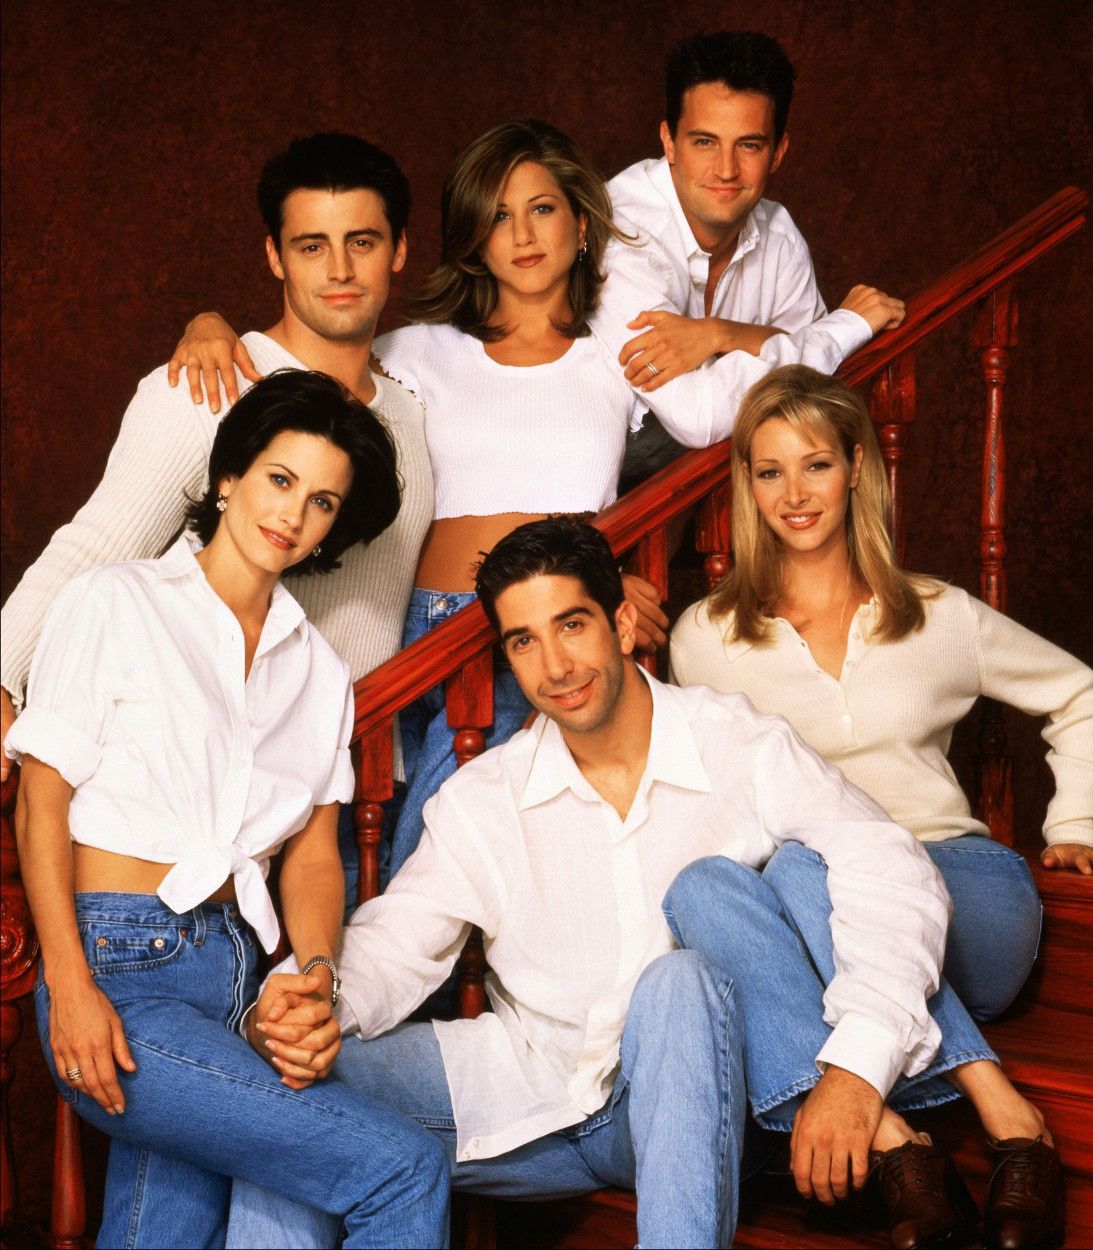 NBC's Friends Cast Photo On Stairs